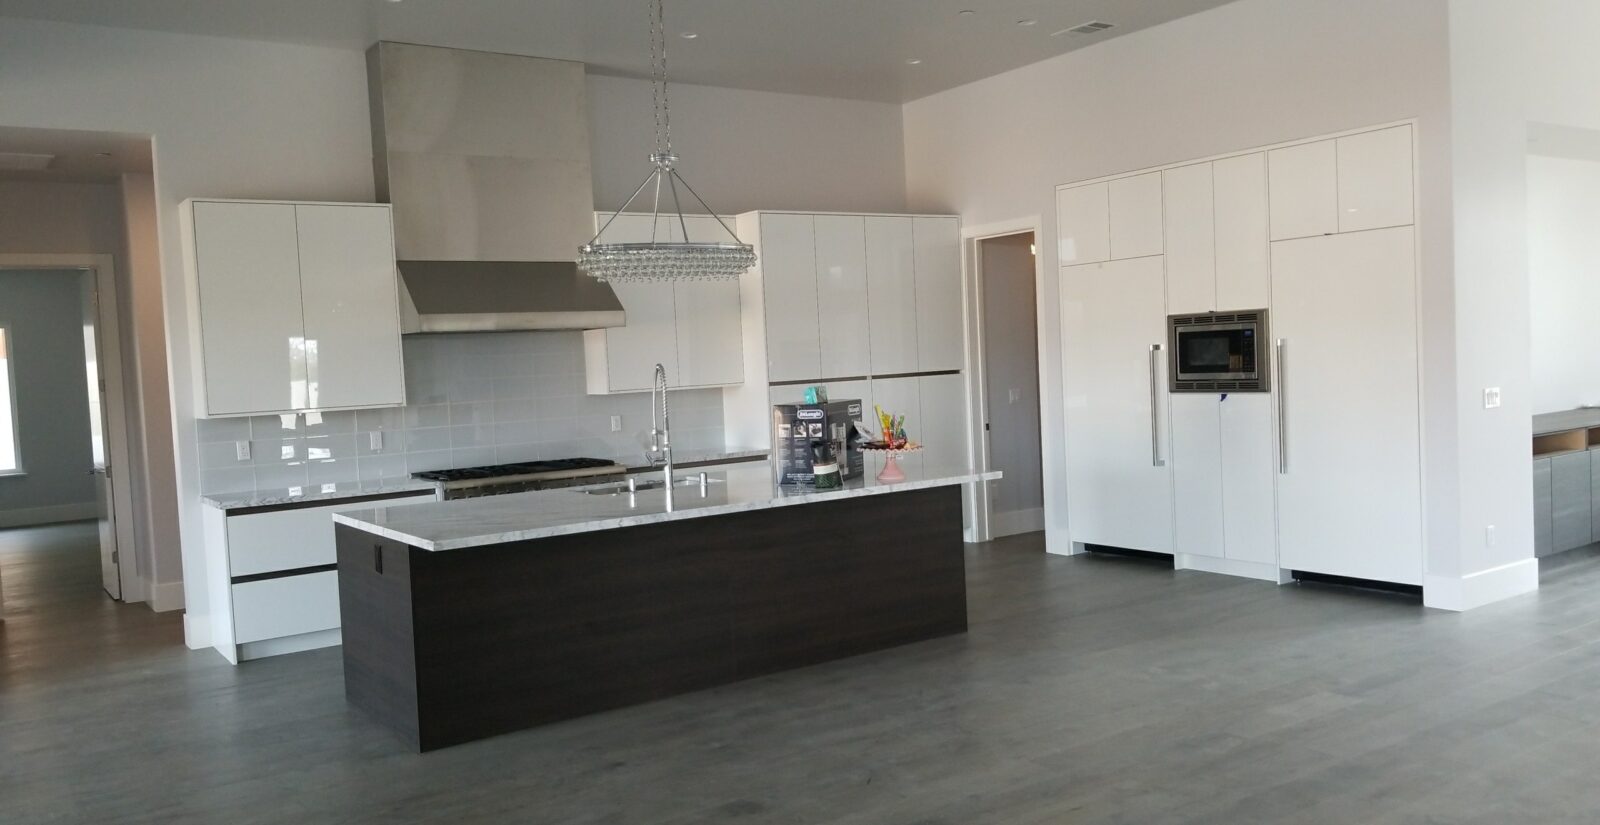 High gloss modern kitchen. Combination of wood and white granite